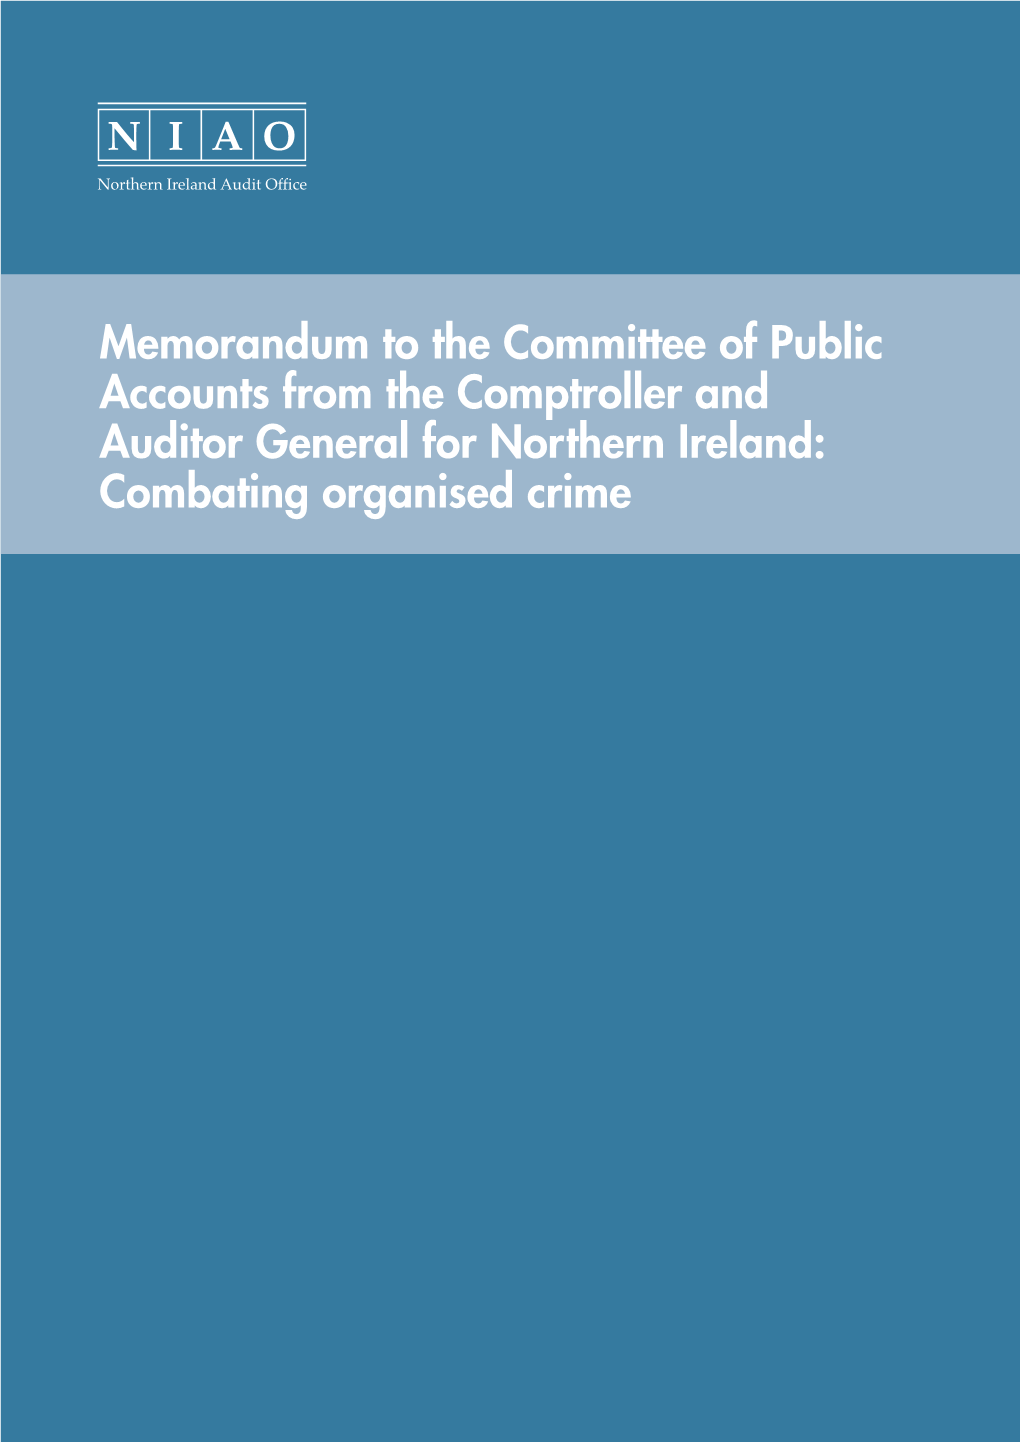 Memorandum to the Committee of Public Accounts from the Comptroller and Auditor General for Northern Ireland: Combating Organised Crime